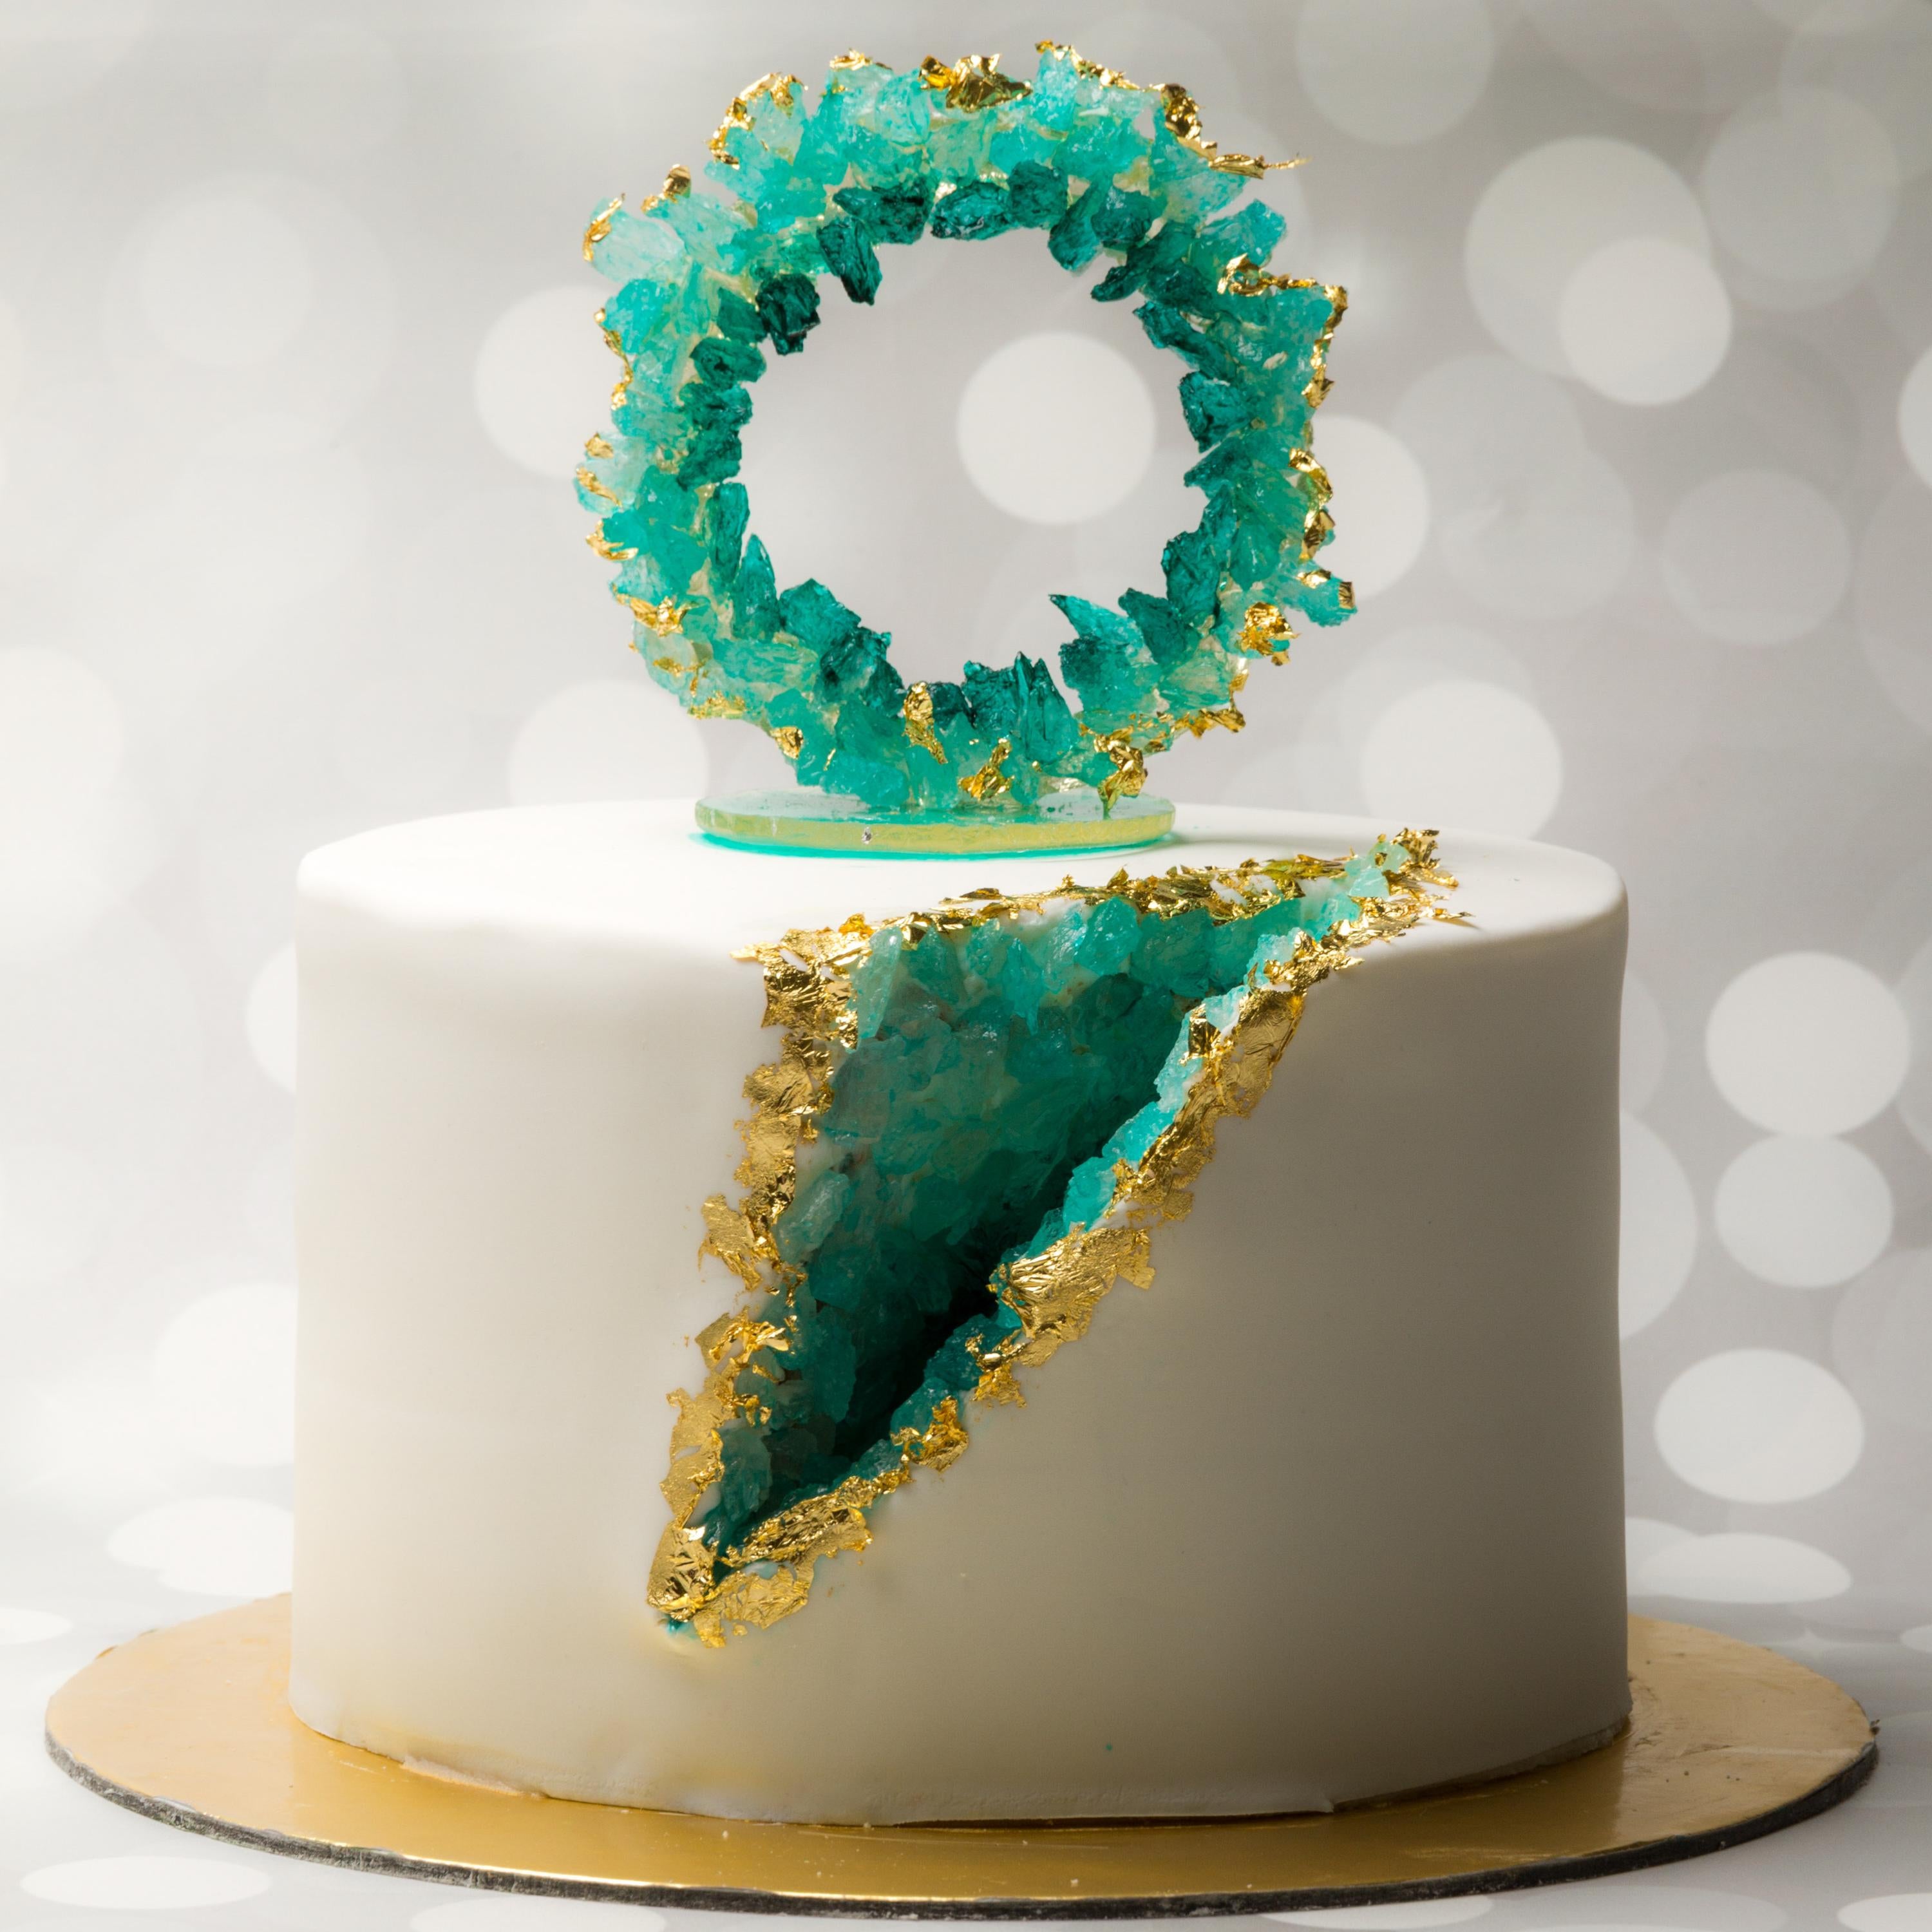 Geode Cake - Hayley Cakes and Cookies Hayley Cakes and Cookies